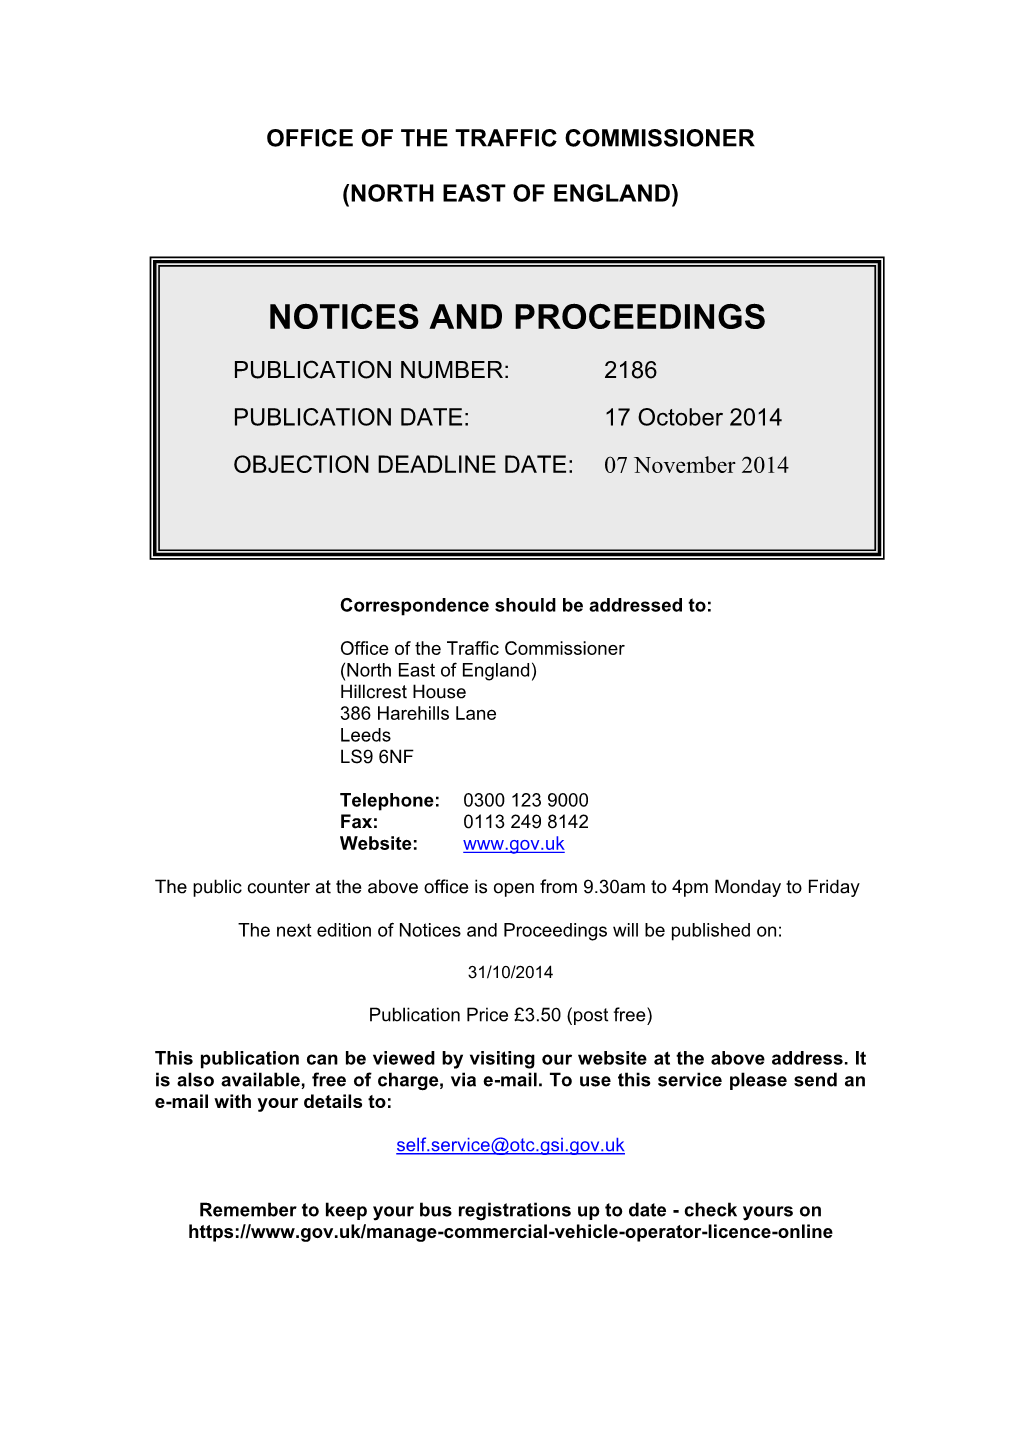 Notices and Proceedings 17 October 2014